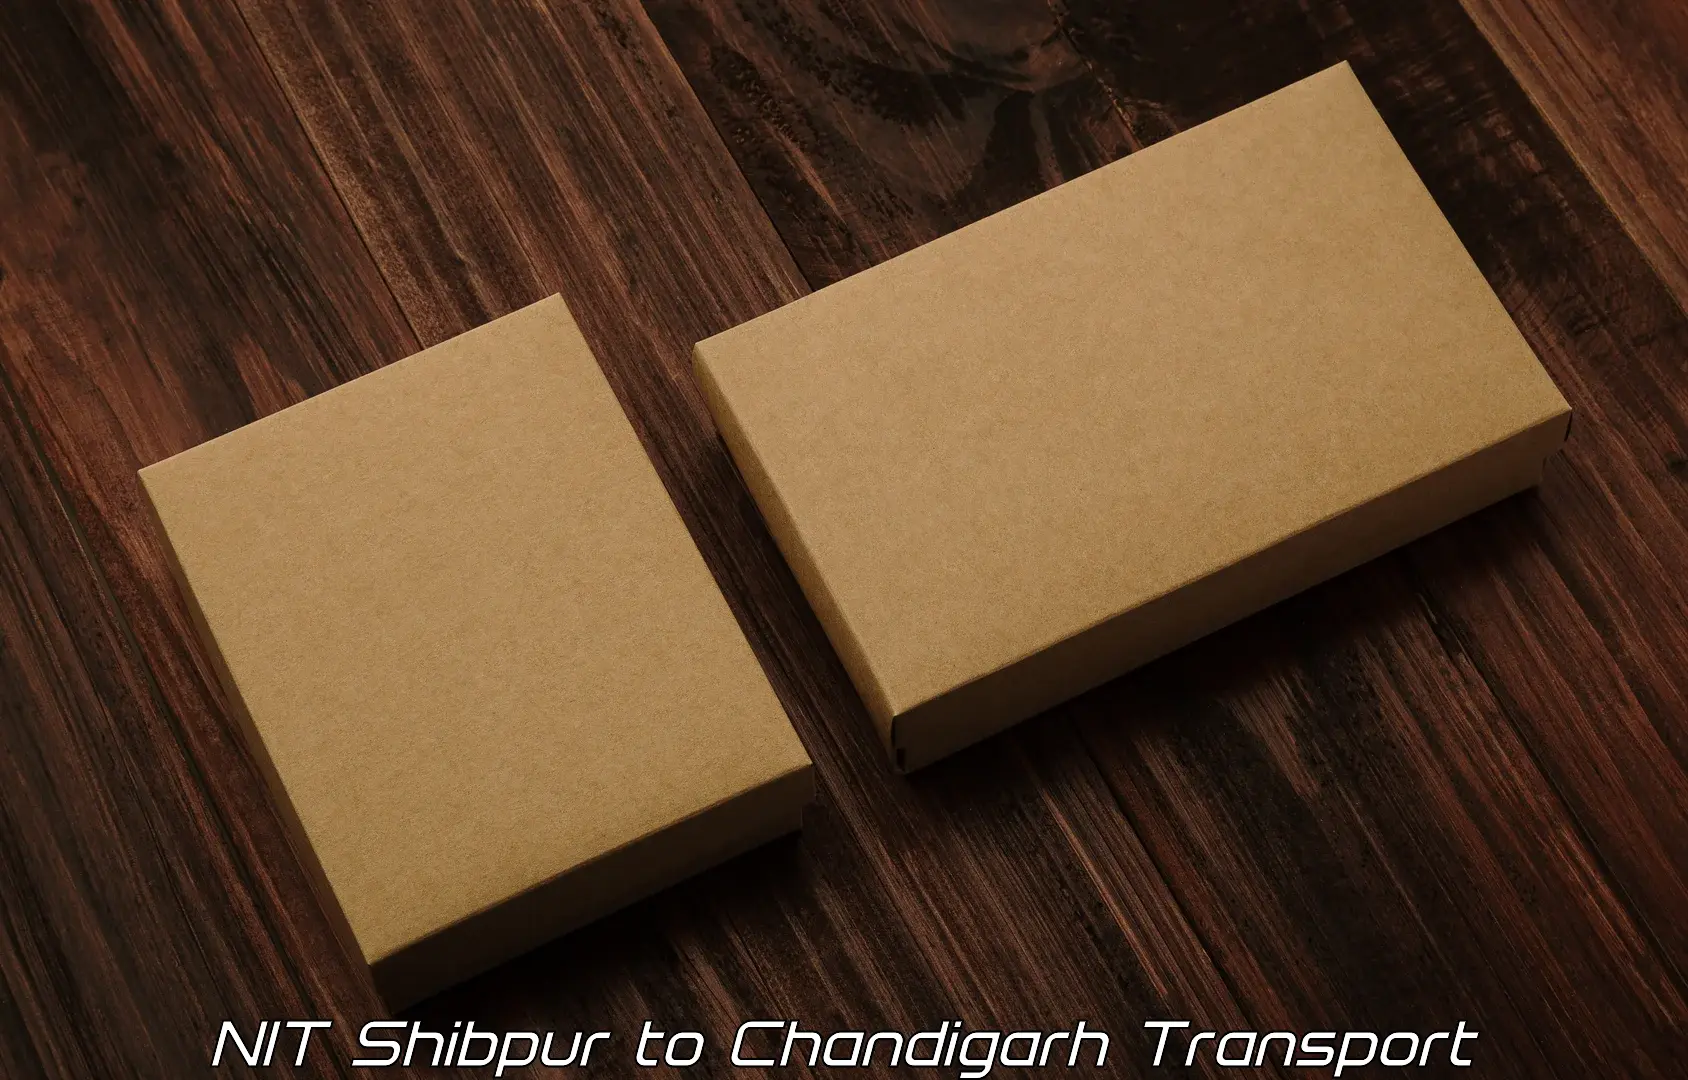 Daily parcel service transport NIT Shibpur to Chandigarh